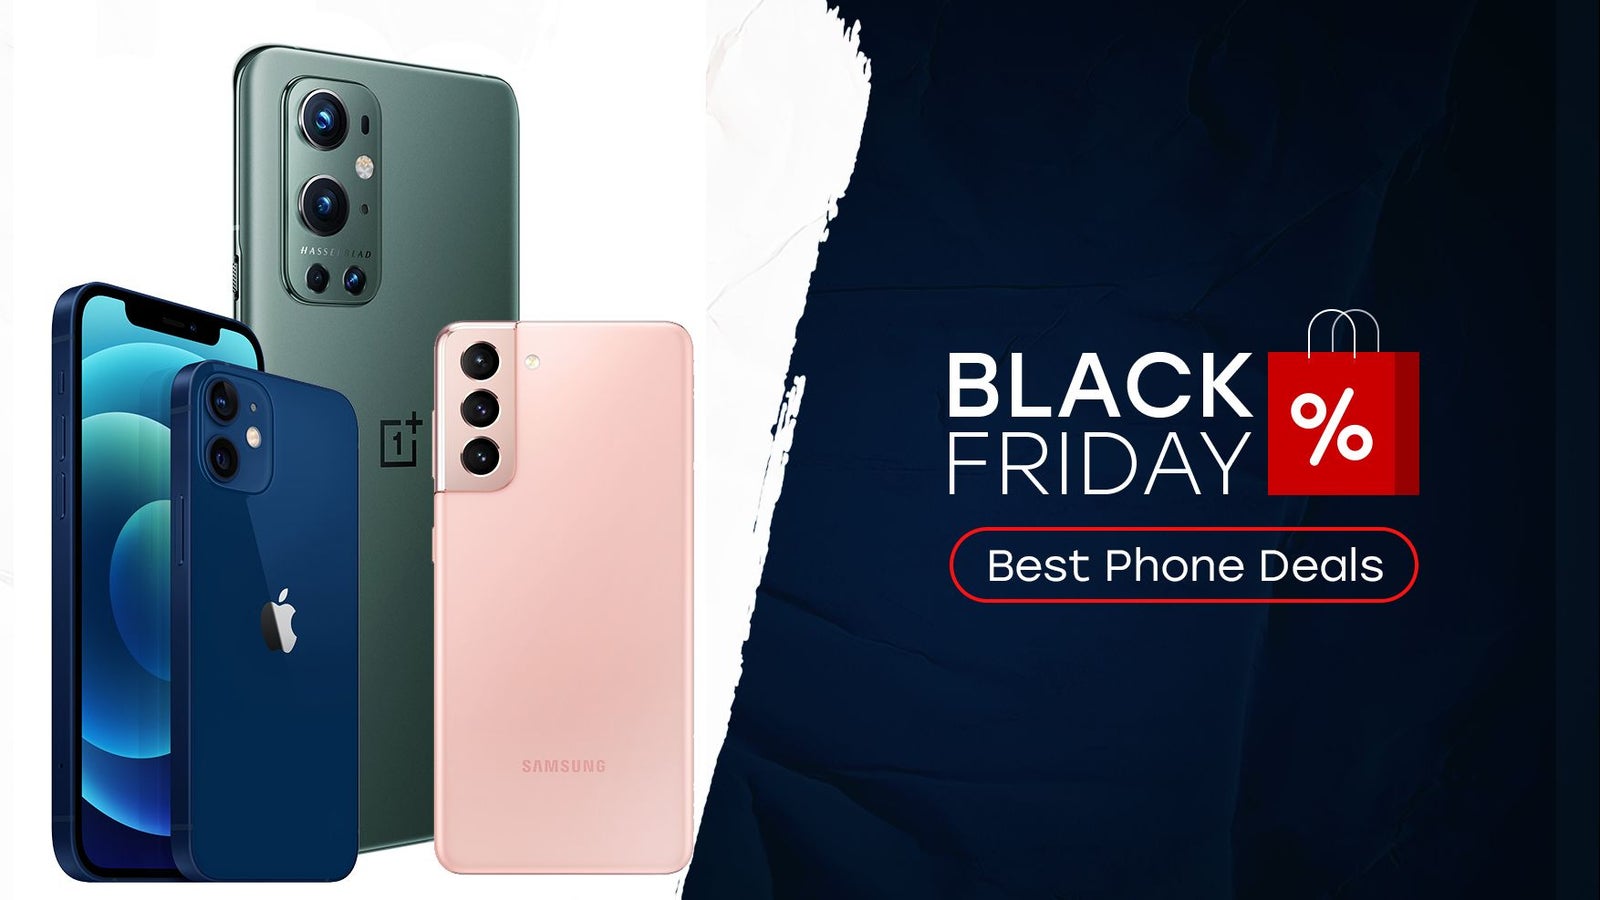 Best Black Friday phone deals (2021): What to expect? - PhoneArena